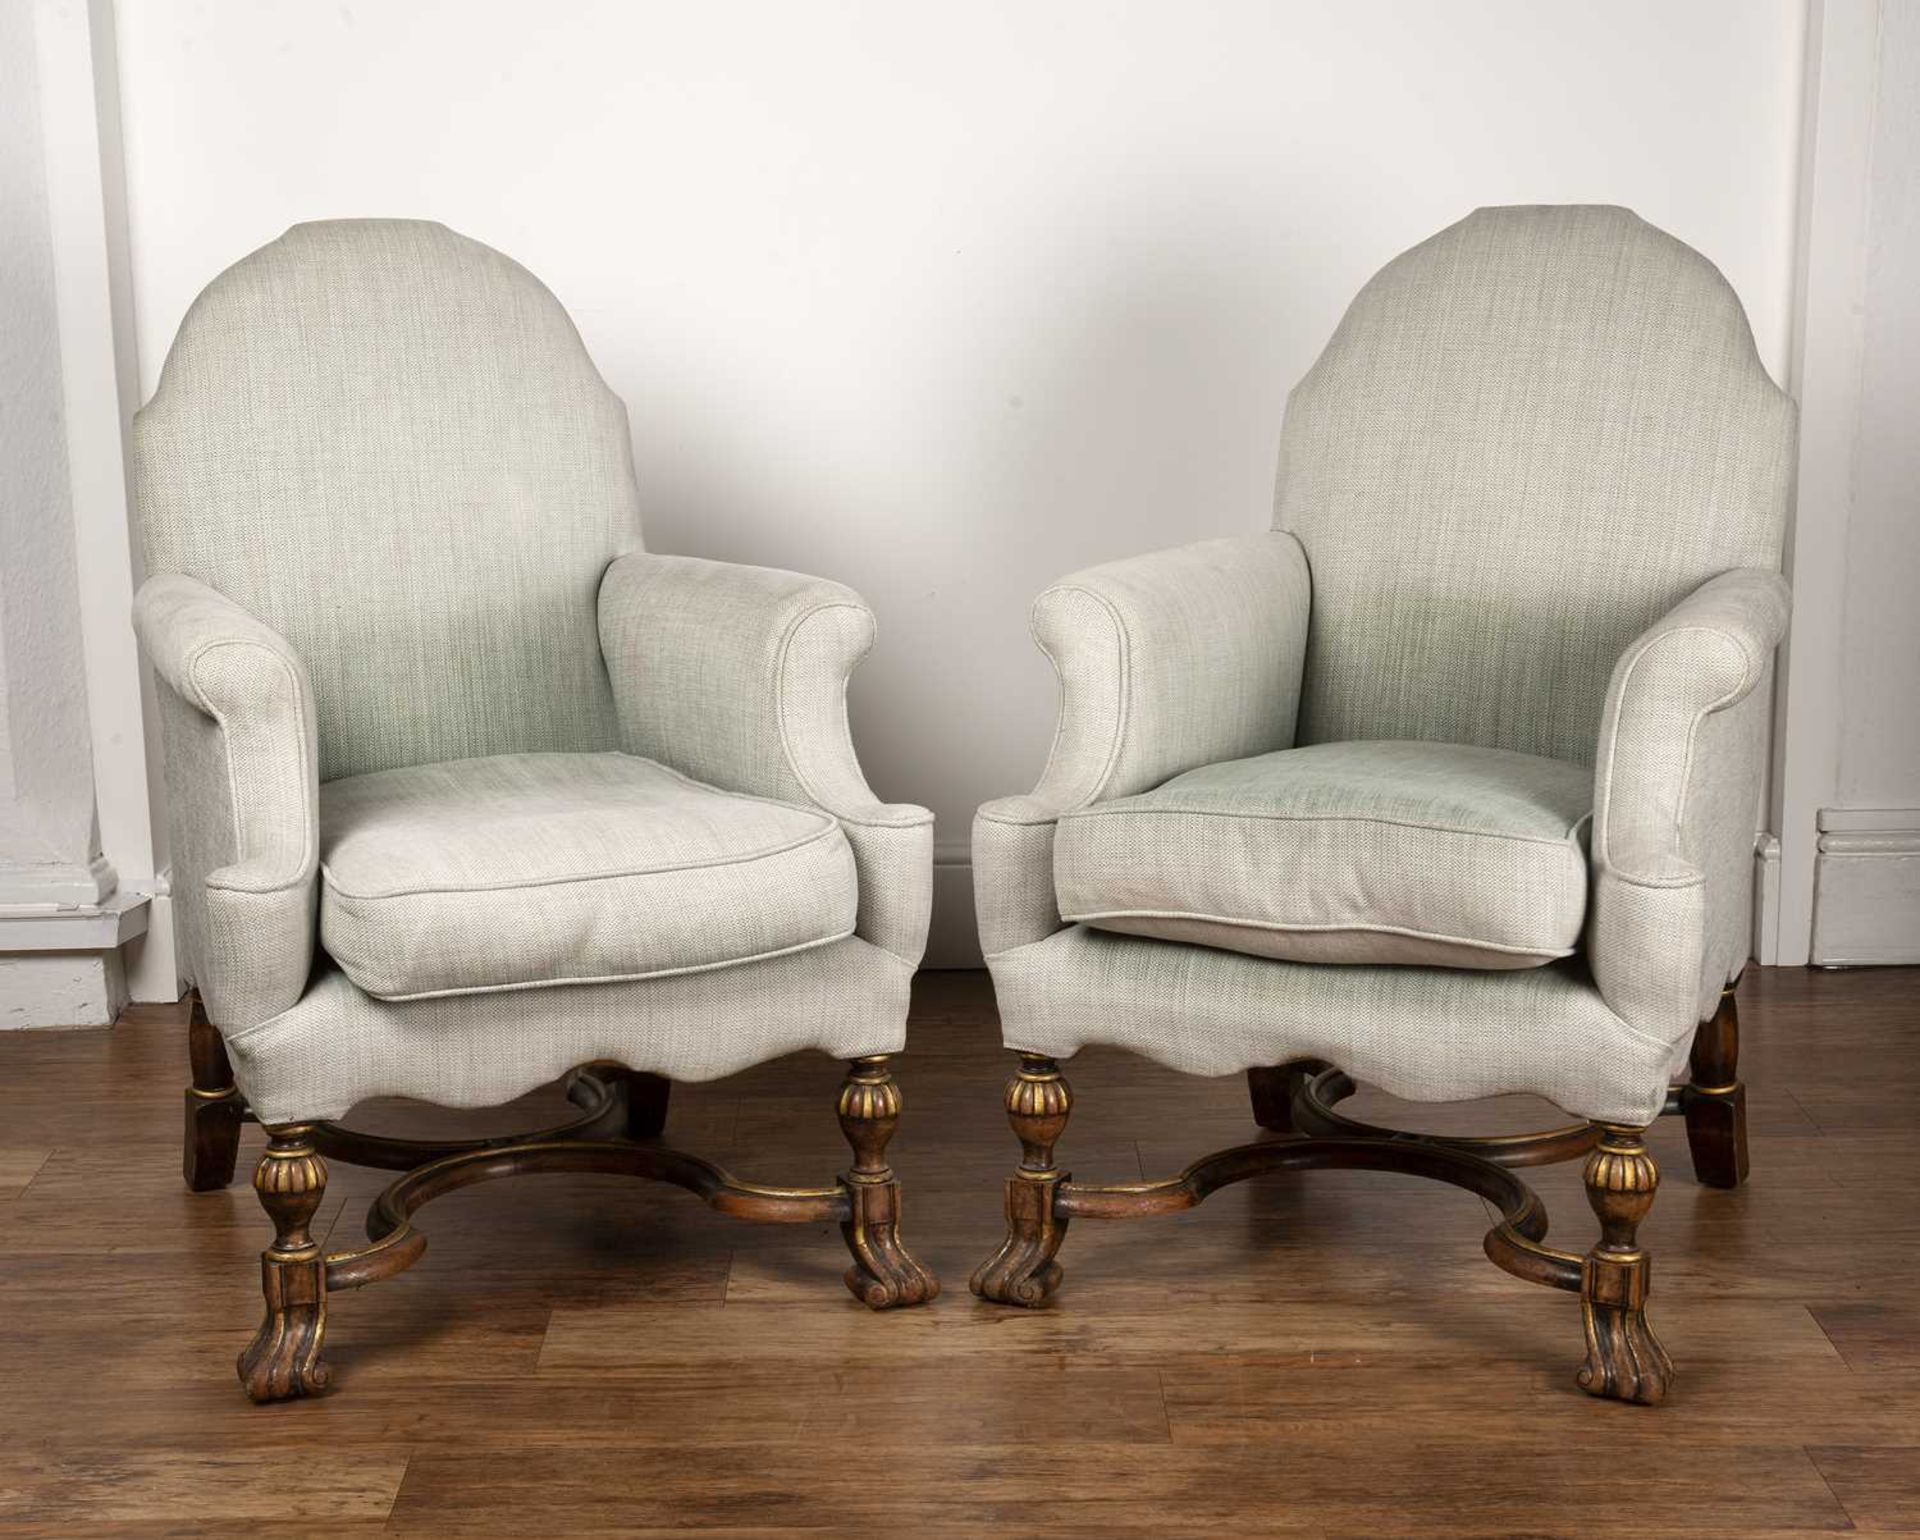 Pair of Howard and Sons chairs circa 1925, in the William and Mary style, with parcel gilt-shaped